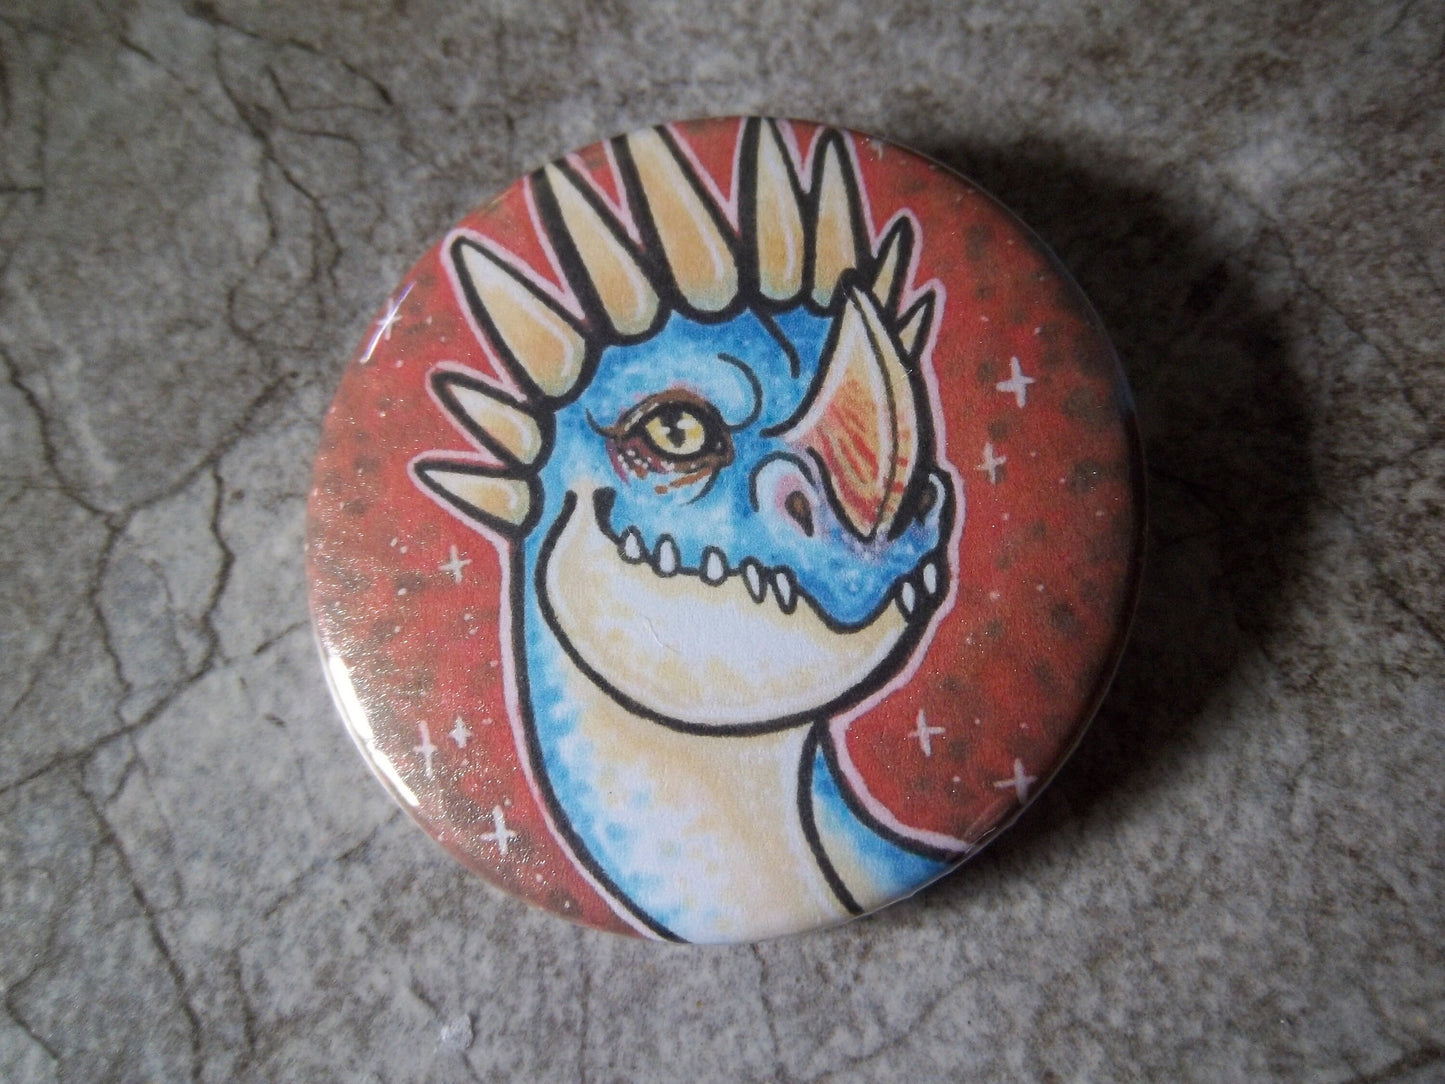 How To Train Your Dragon 2.25" Metal Pin Back Buttons